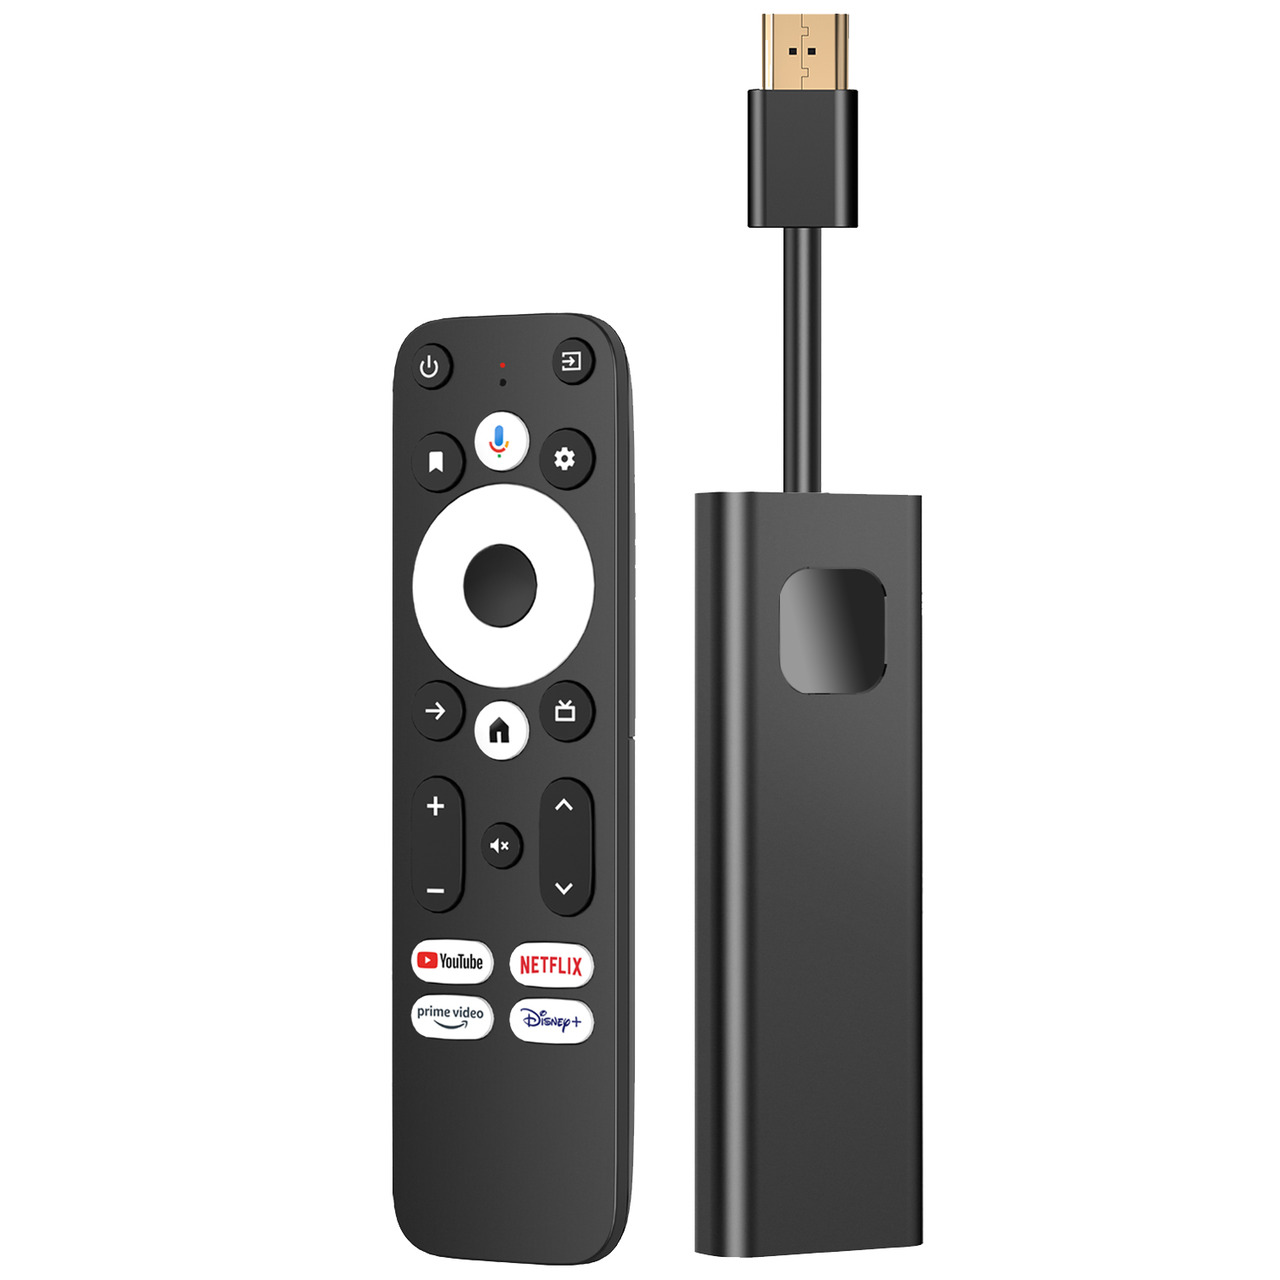 Orbsmart Android-TV-Stick Dcolor GD1- Android 11- 4K-Streaming- HDR- Sprachsteuerung